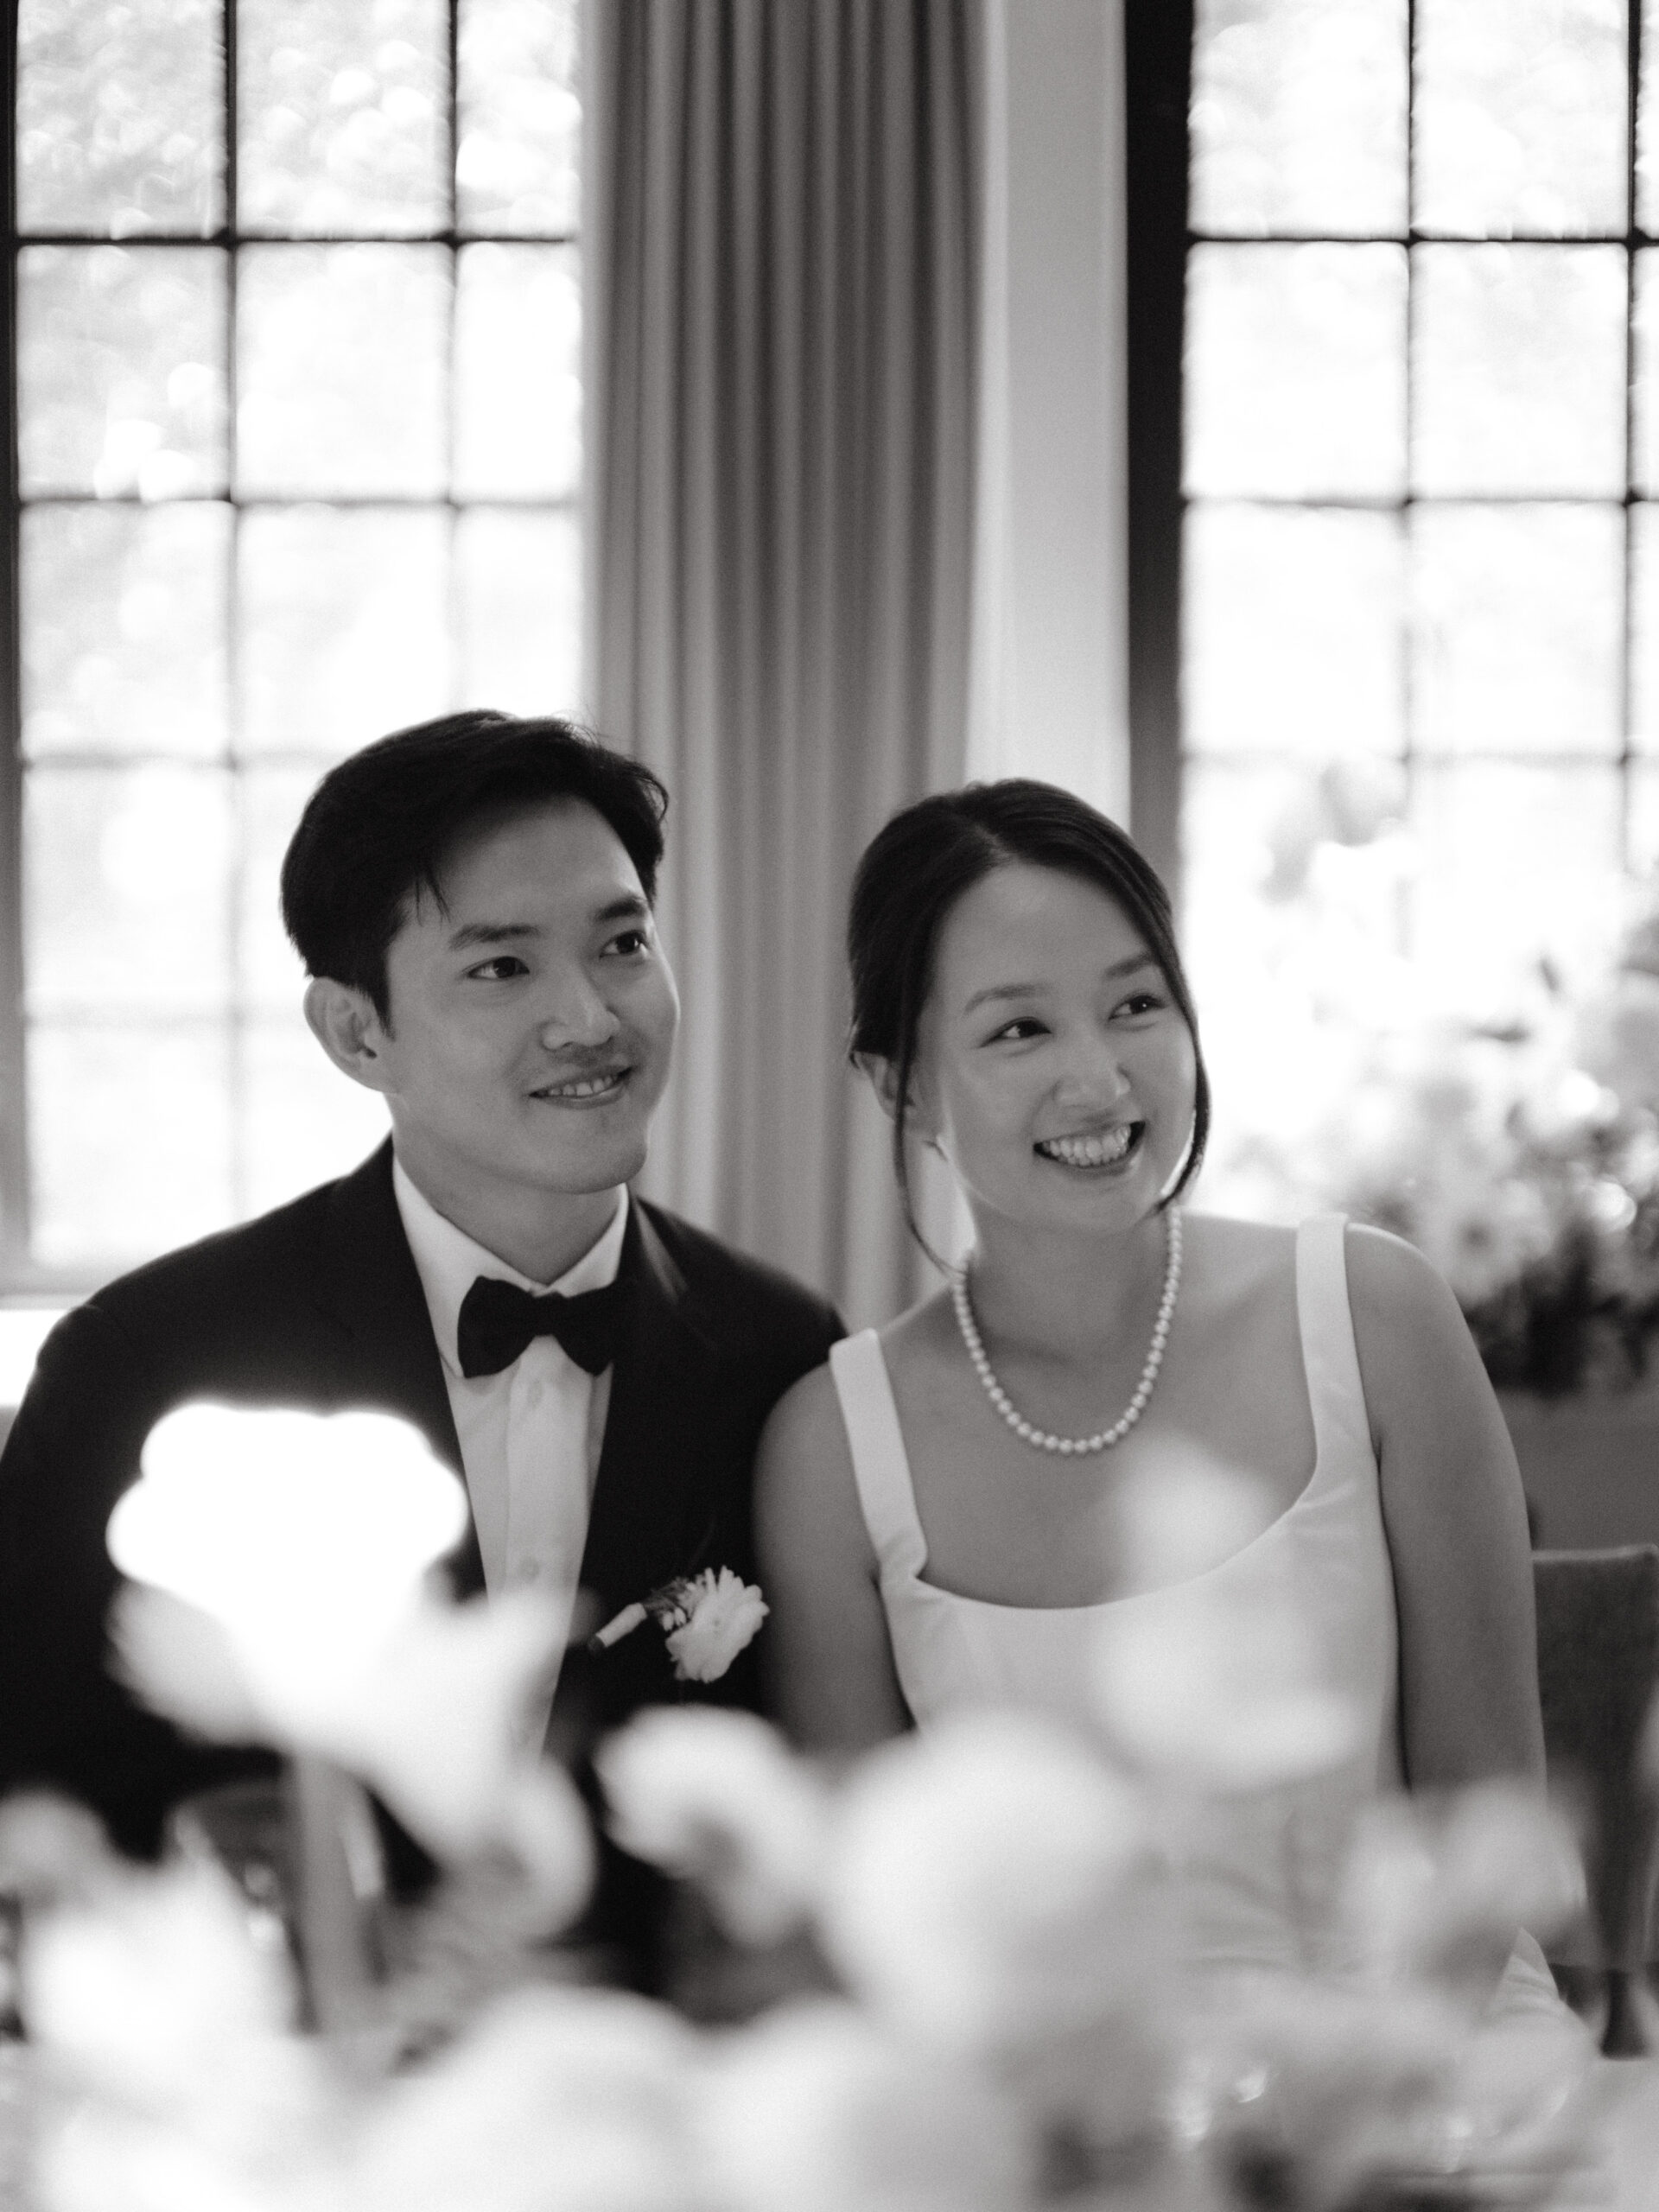 Candid wedding photography image of the happy newlyweds in the wedding reception by Jenny Fu Studio